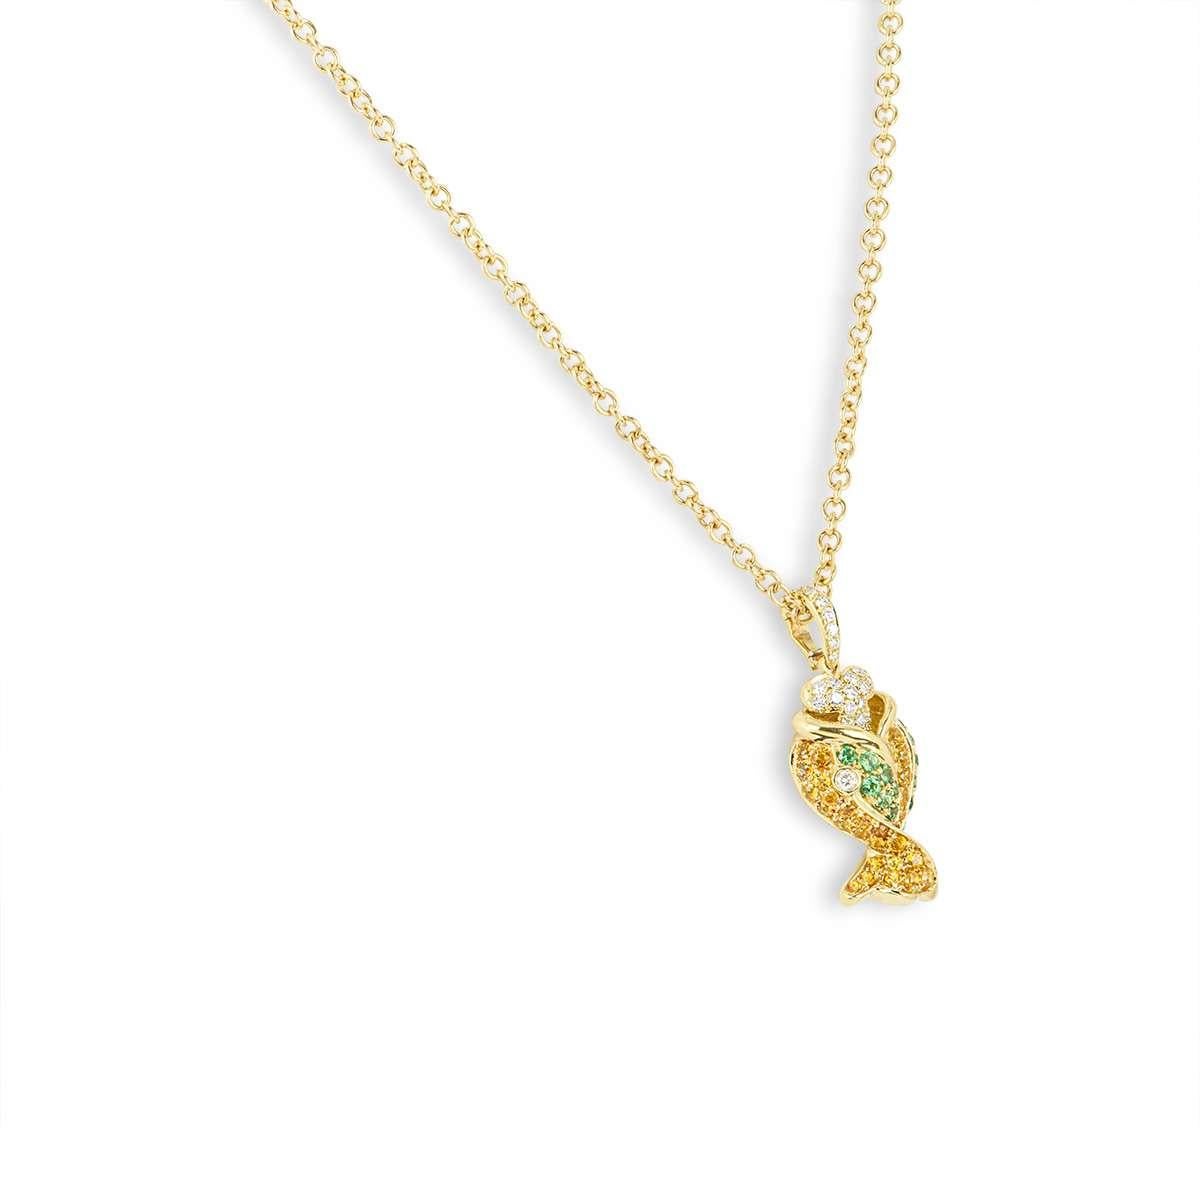 An 18k yellow gold fish pendant. The fish motif is set with round brilliant cut diamonds, emeralds and yellow sapphires. The diamonds total approximately 0.44ct, the sapphires total 0.72ct and the yellow sapphires total 1.12ct. The pendant measures